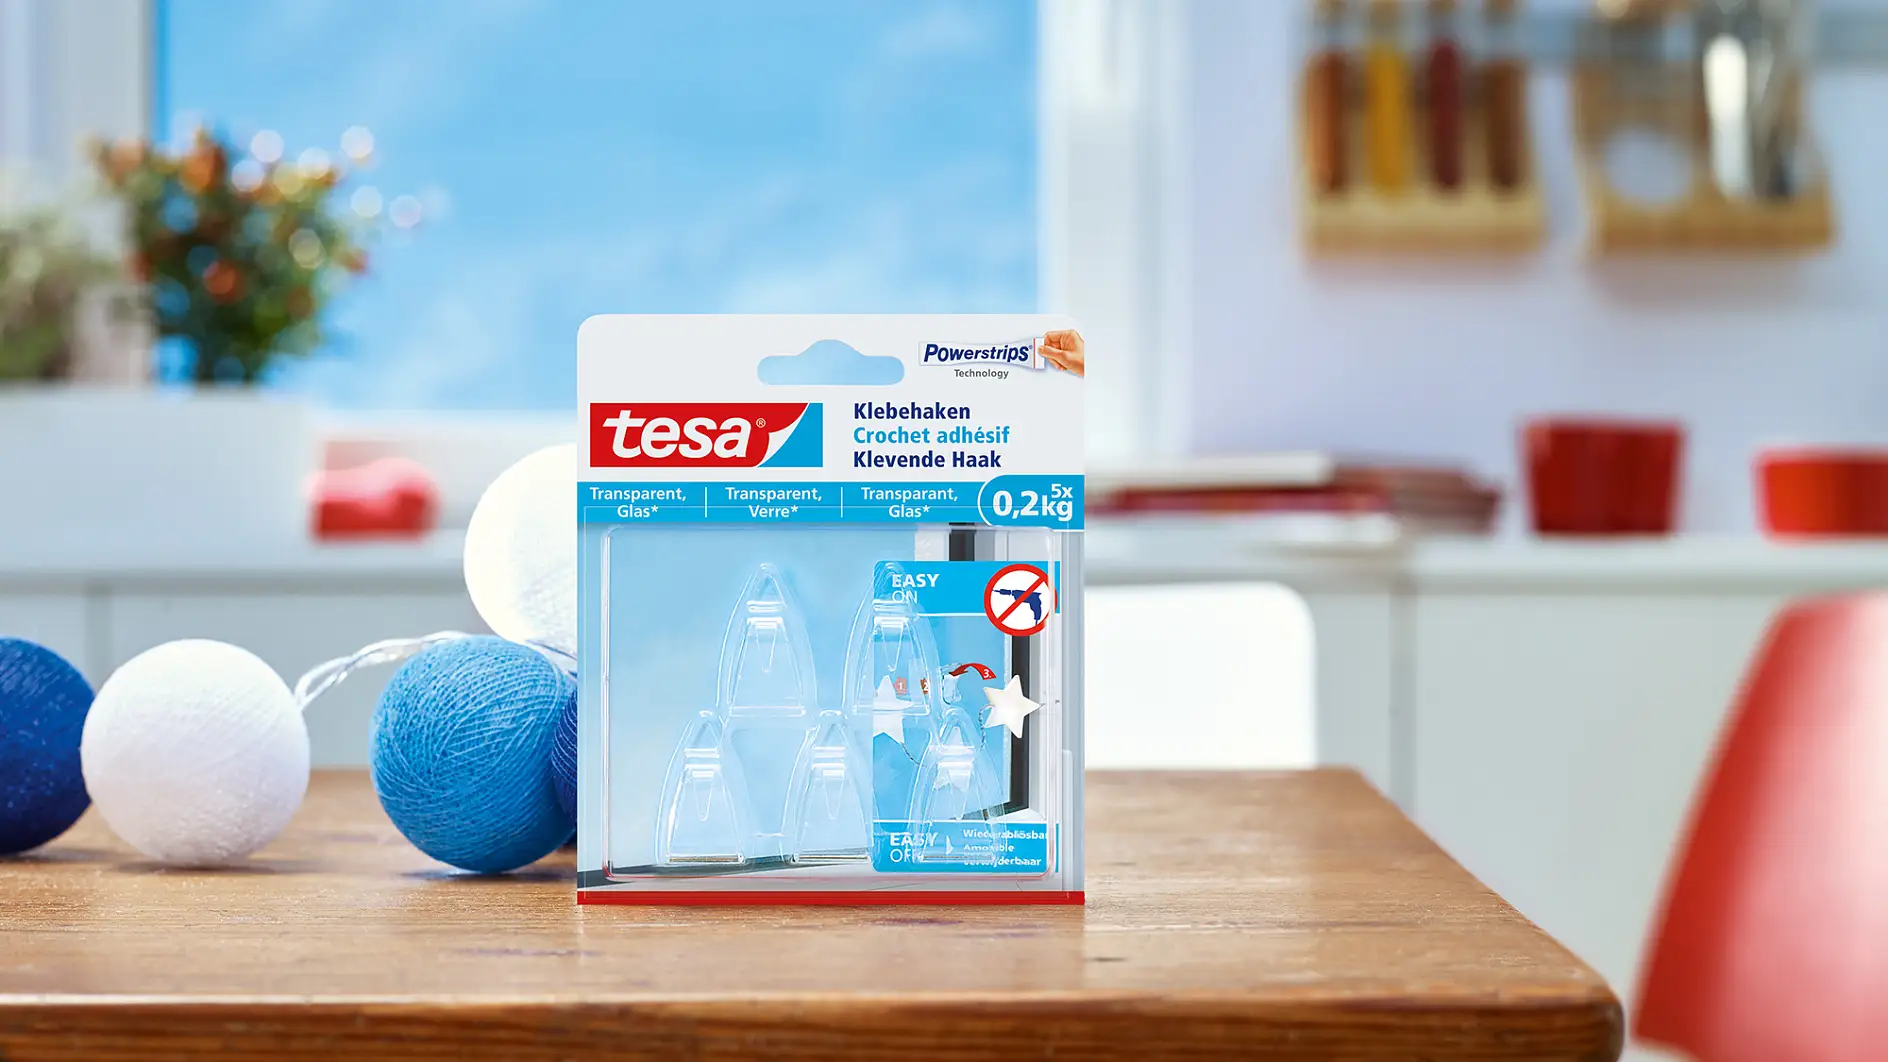 How to use the tesa® Adhesive Hook for Transparent & Glass 0.2kg.